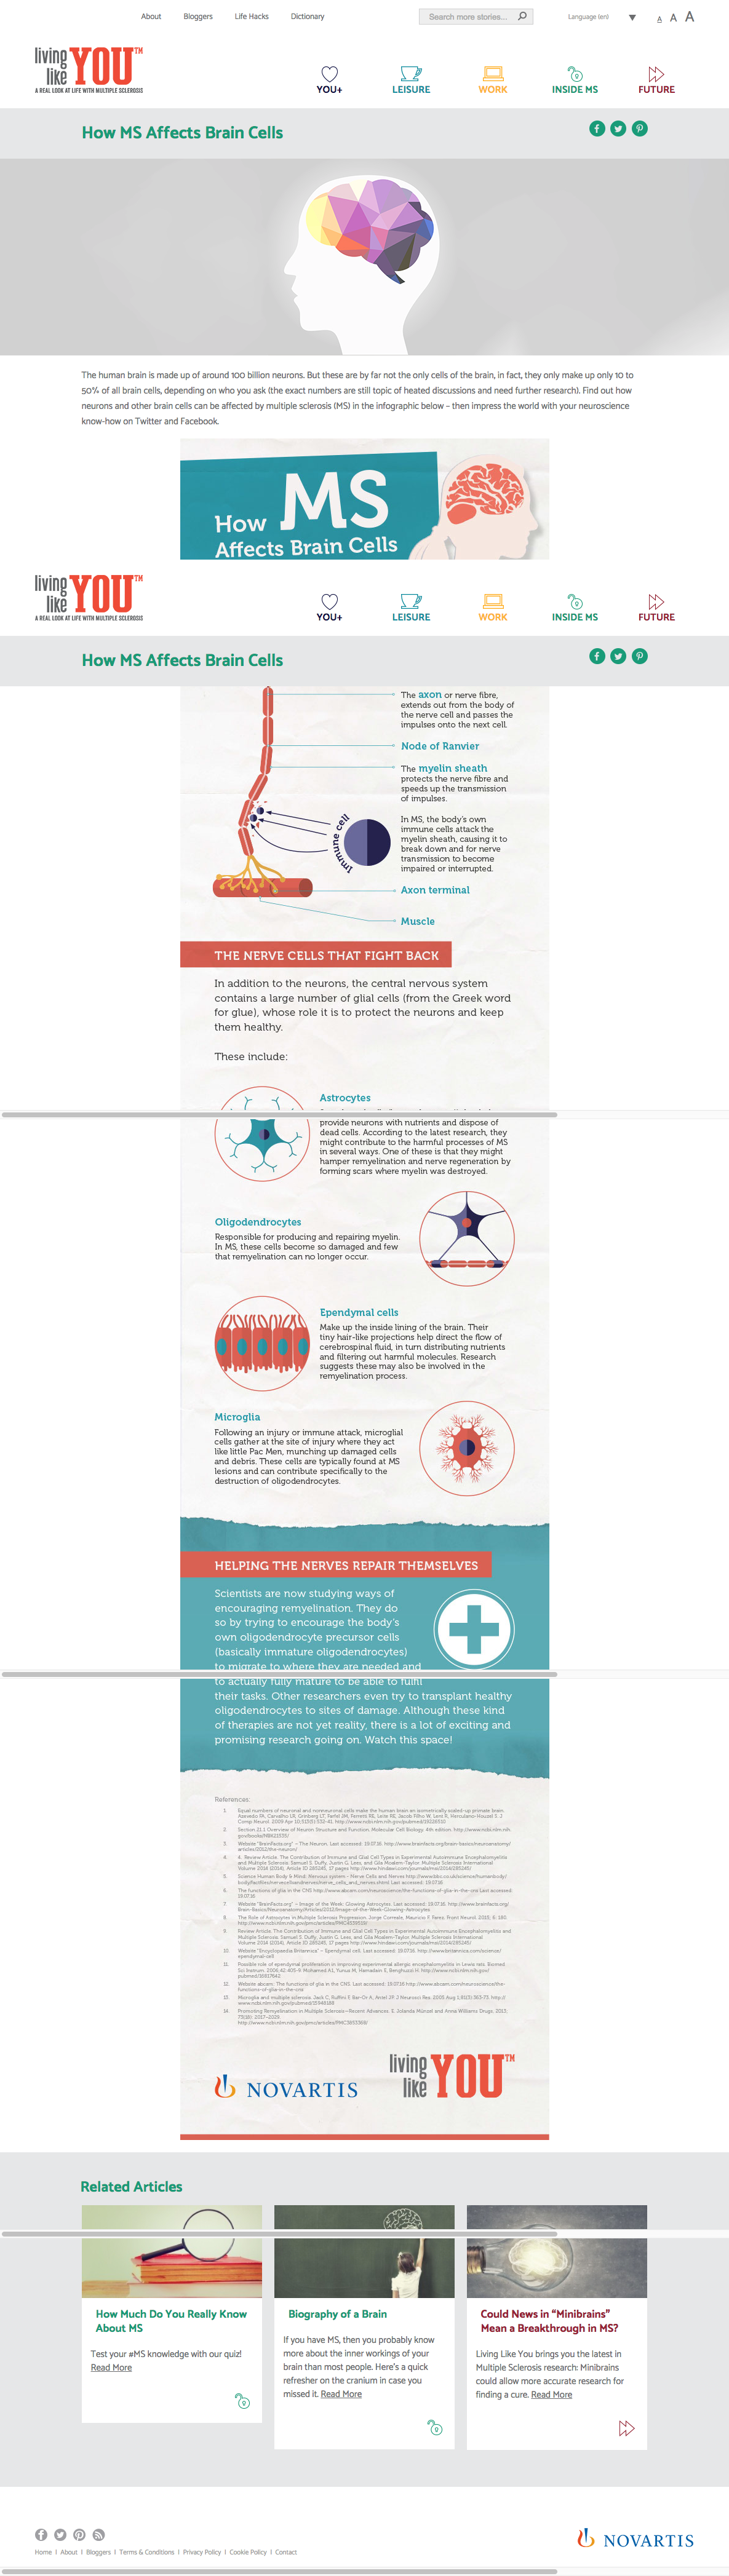 Unbranded Pharma Content Hub - Infographic and Article